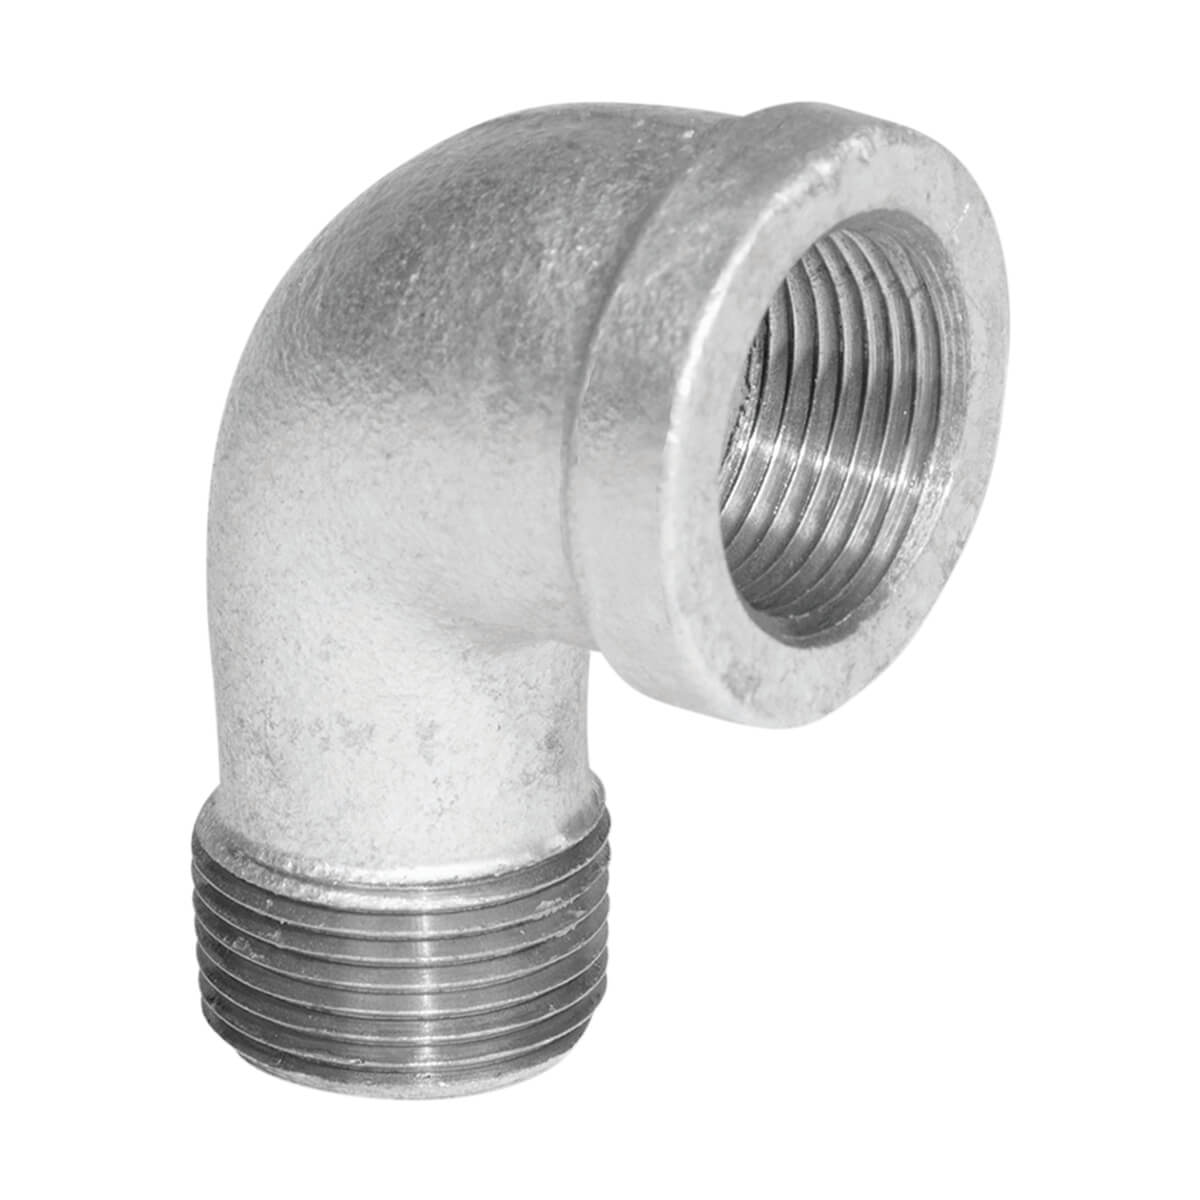 Fitting Galvanized Iron 90 ST Elbow - 1-1/4-in